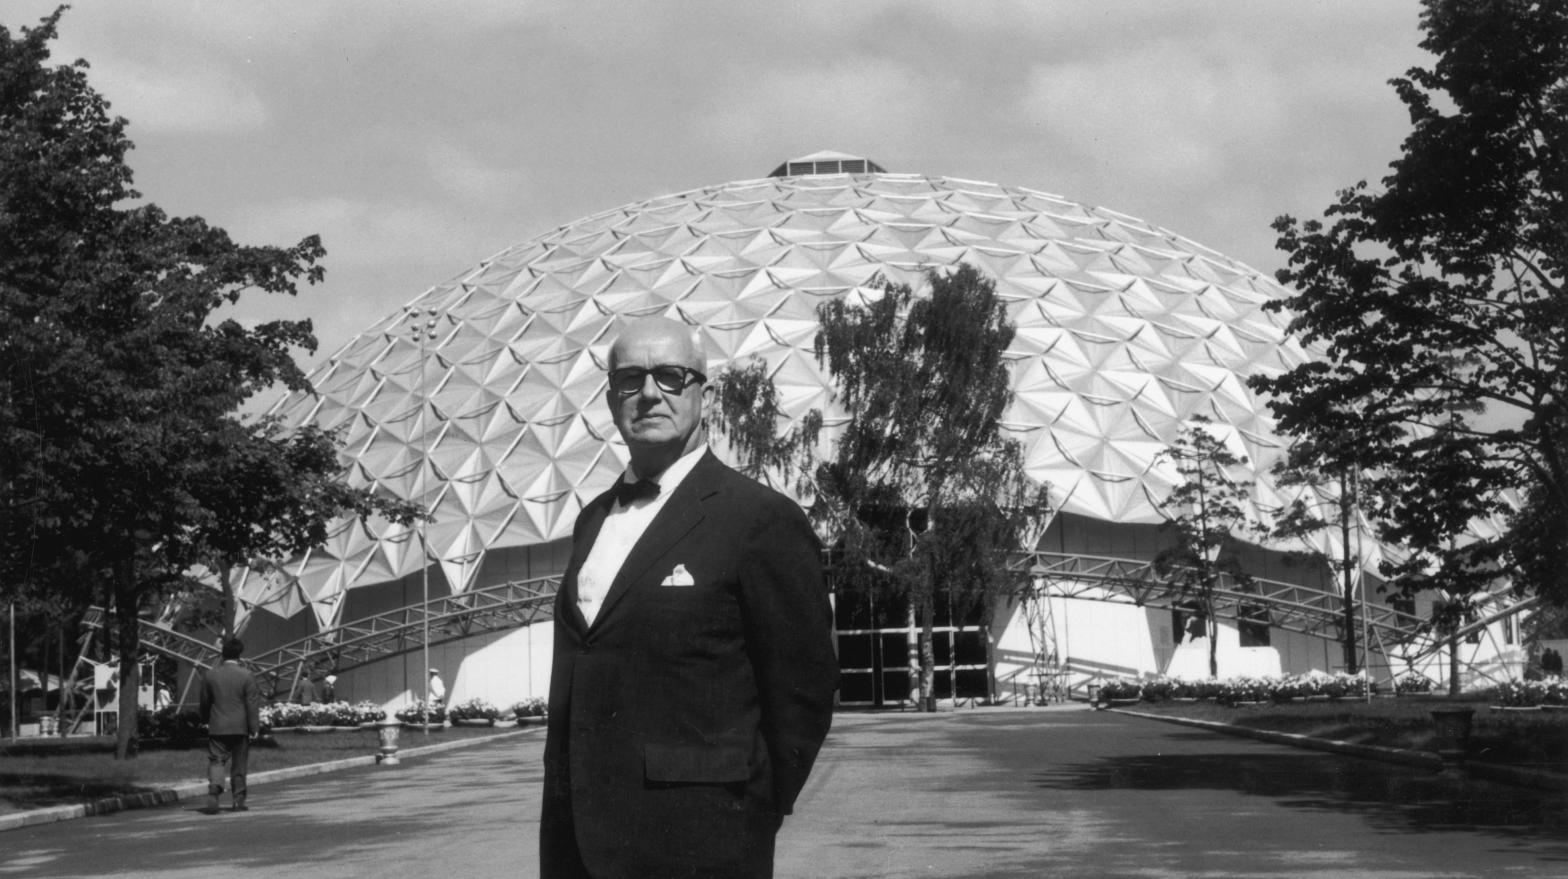 Buckminster Fuller stands in front of the geodesic dome building at the American National Exhibition in Moscow in 1959. (Photo: Hulton Archive, Getty Images)